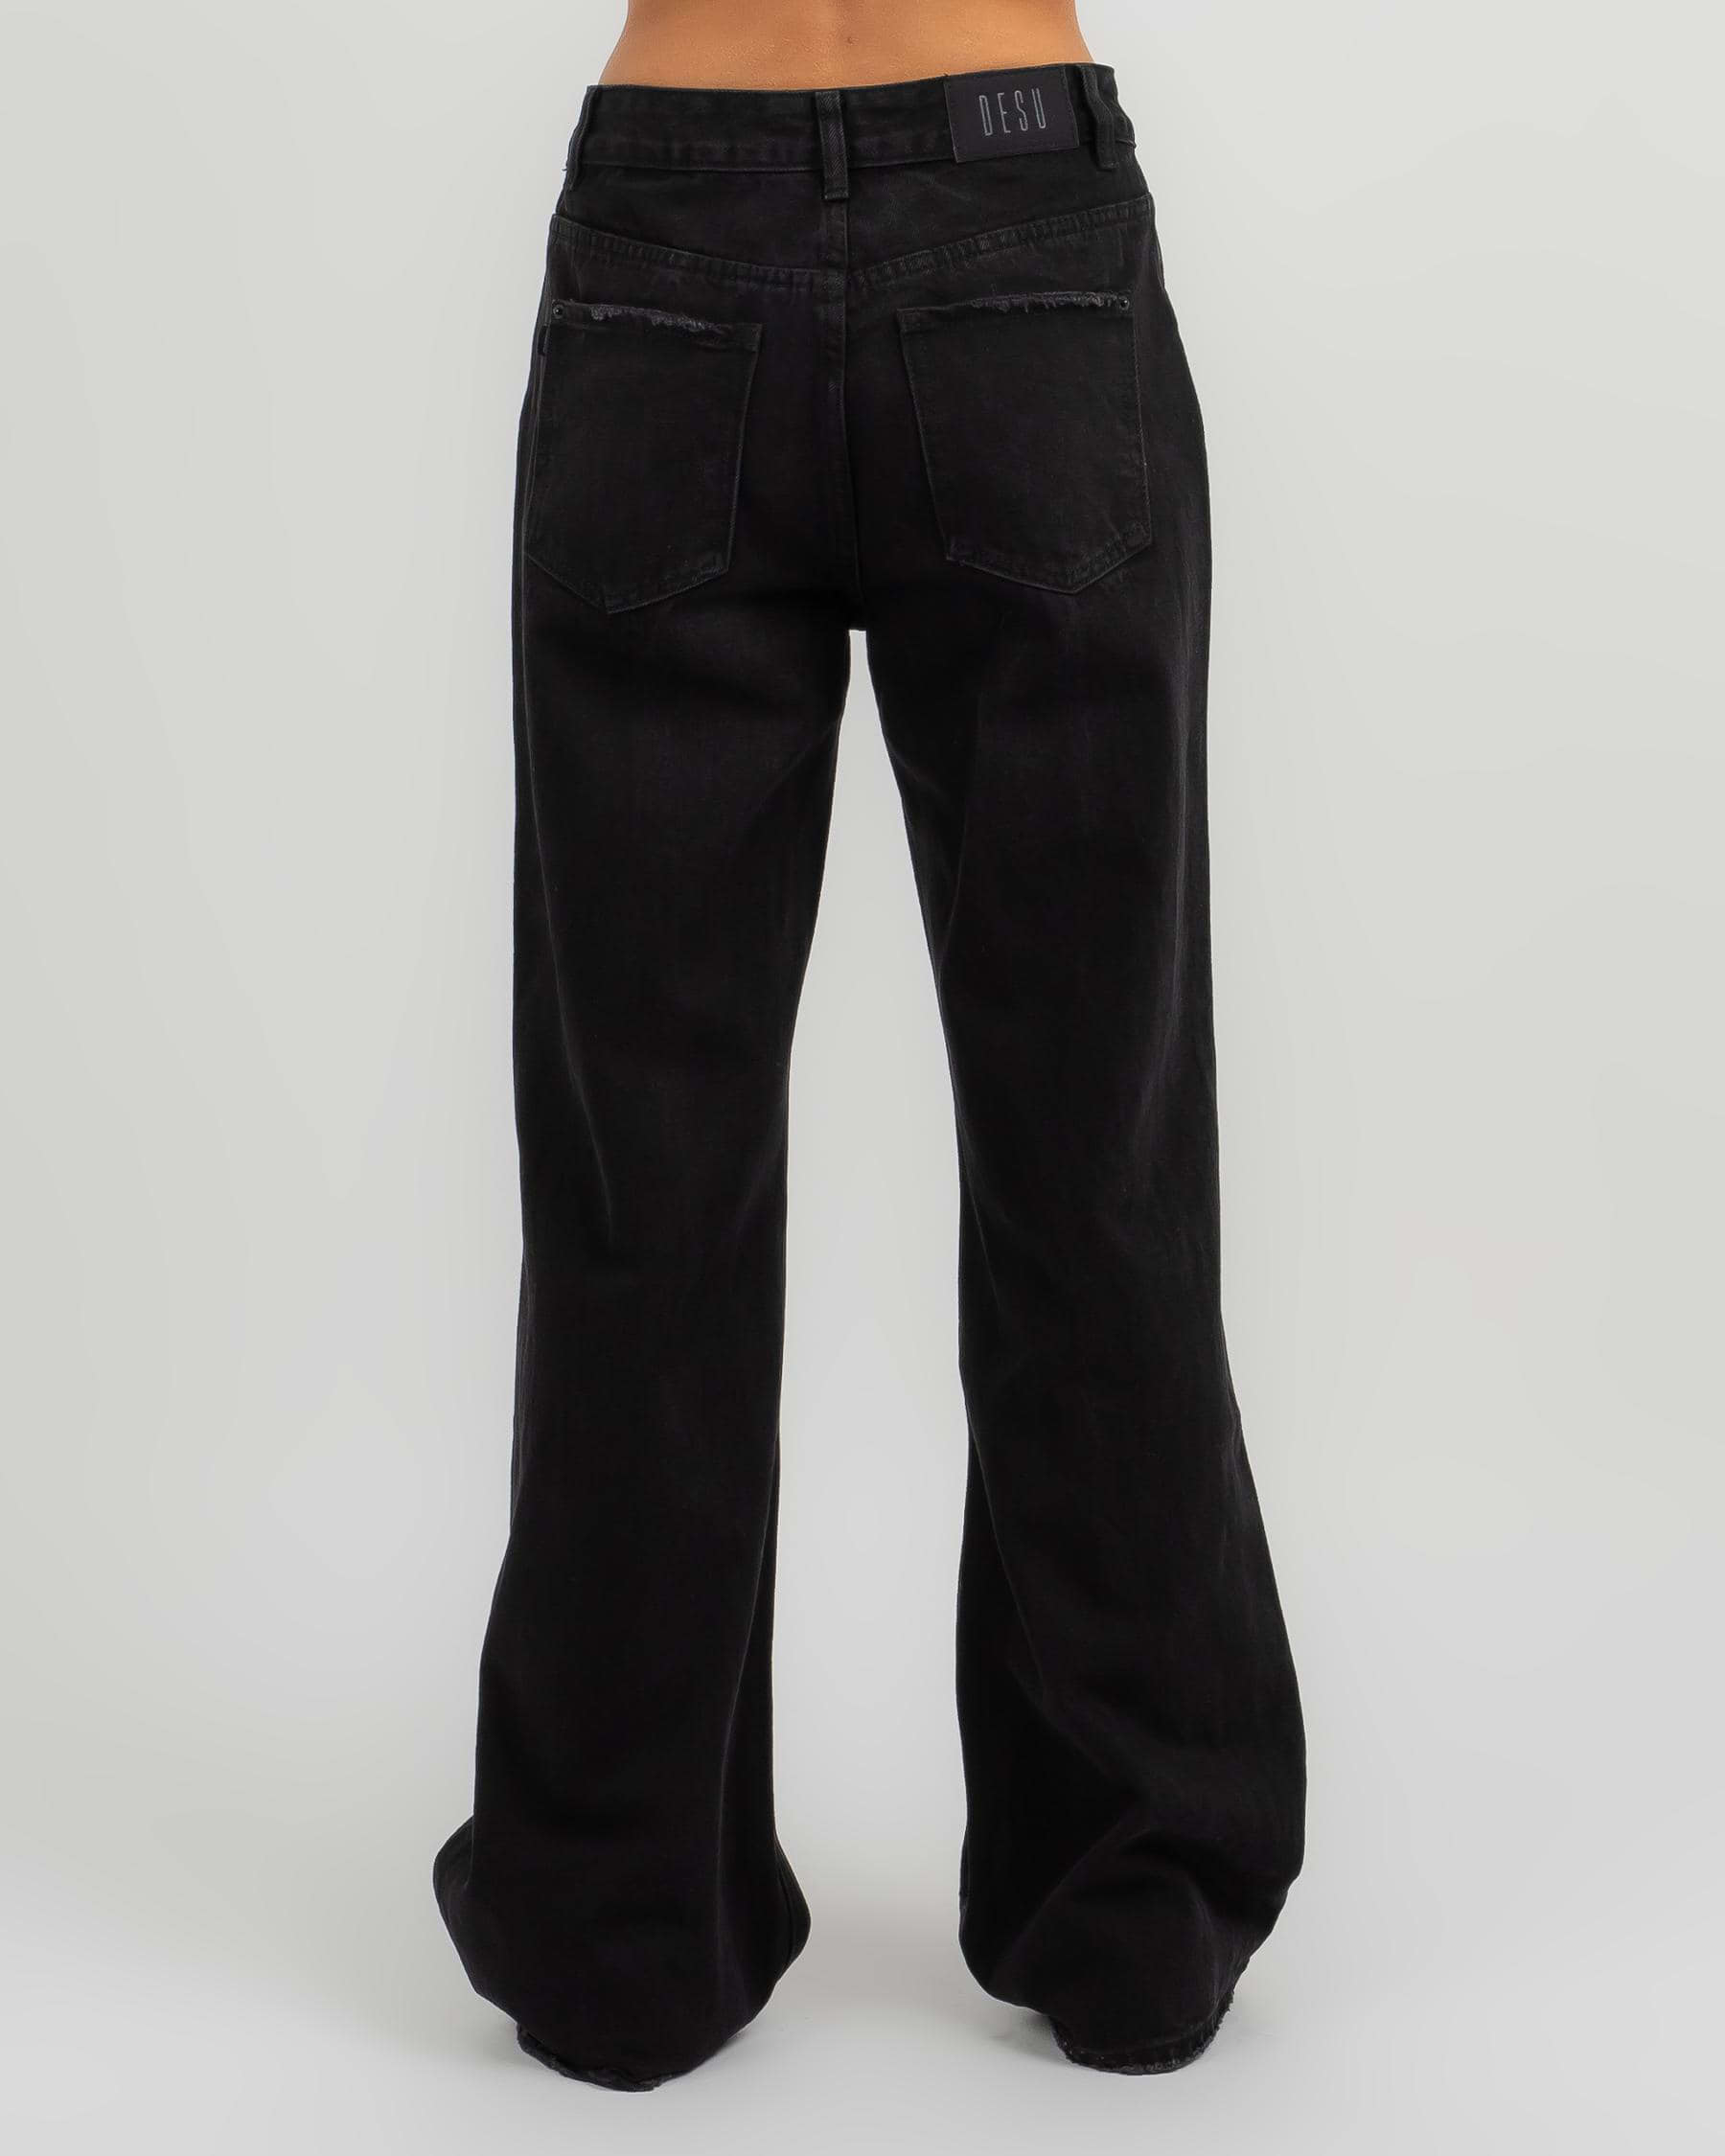 DESU Eden Jeans In Washed Black - FREE* Shipping & Easy Returns - City  Beach United States